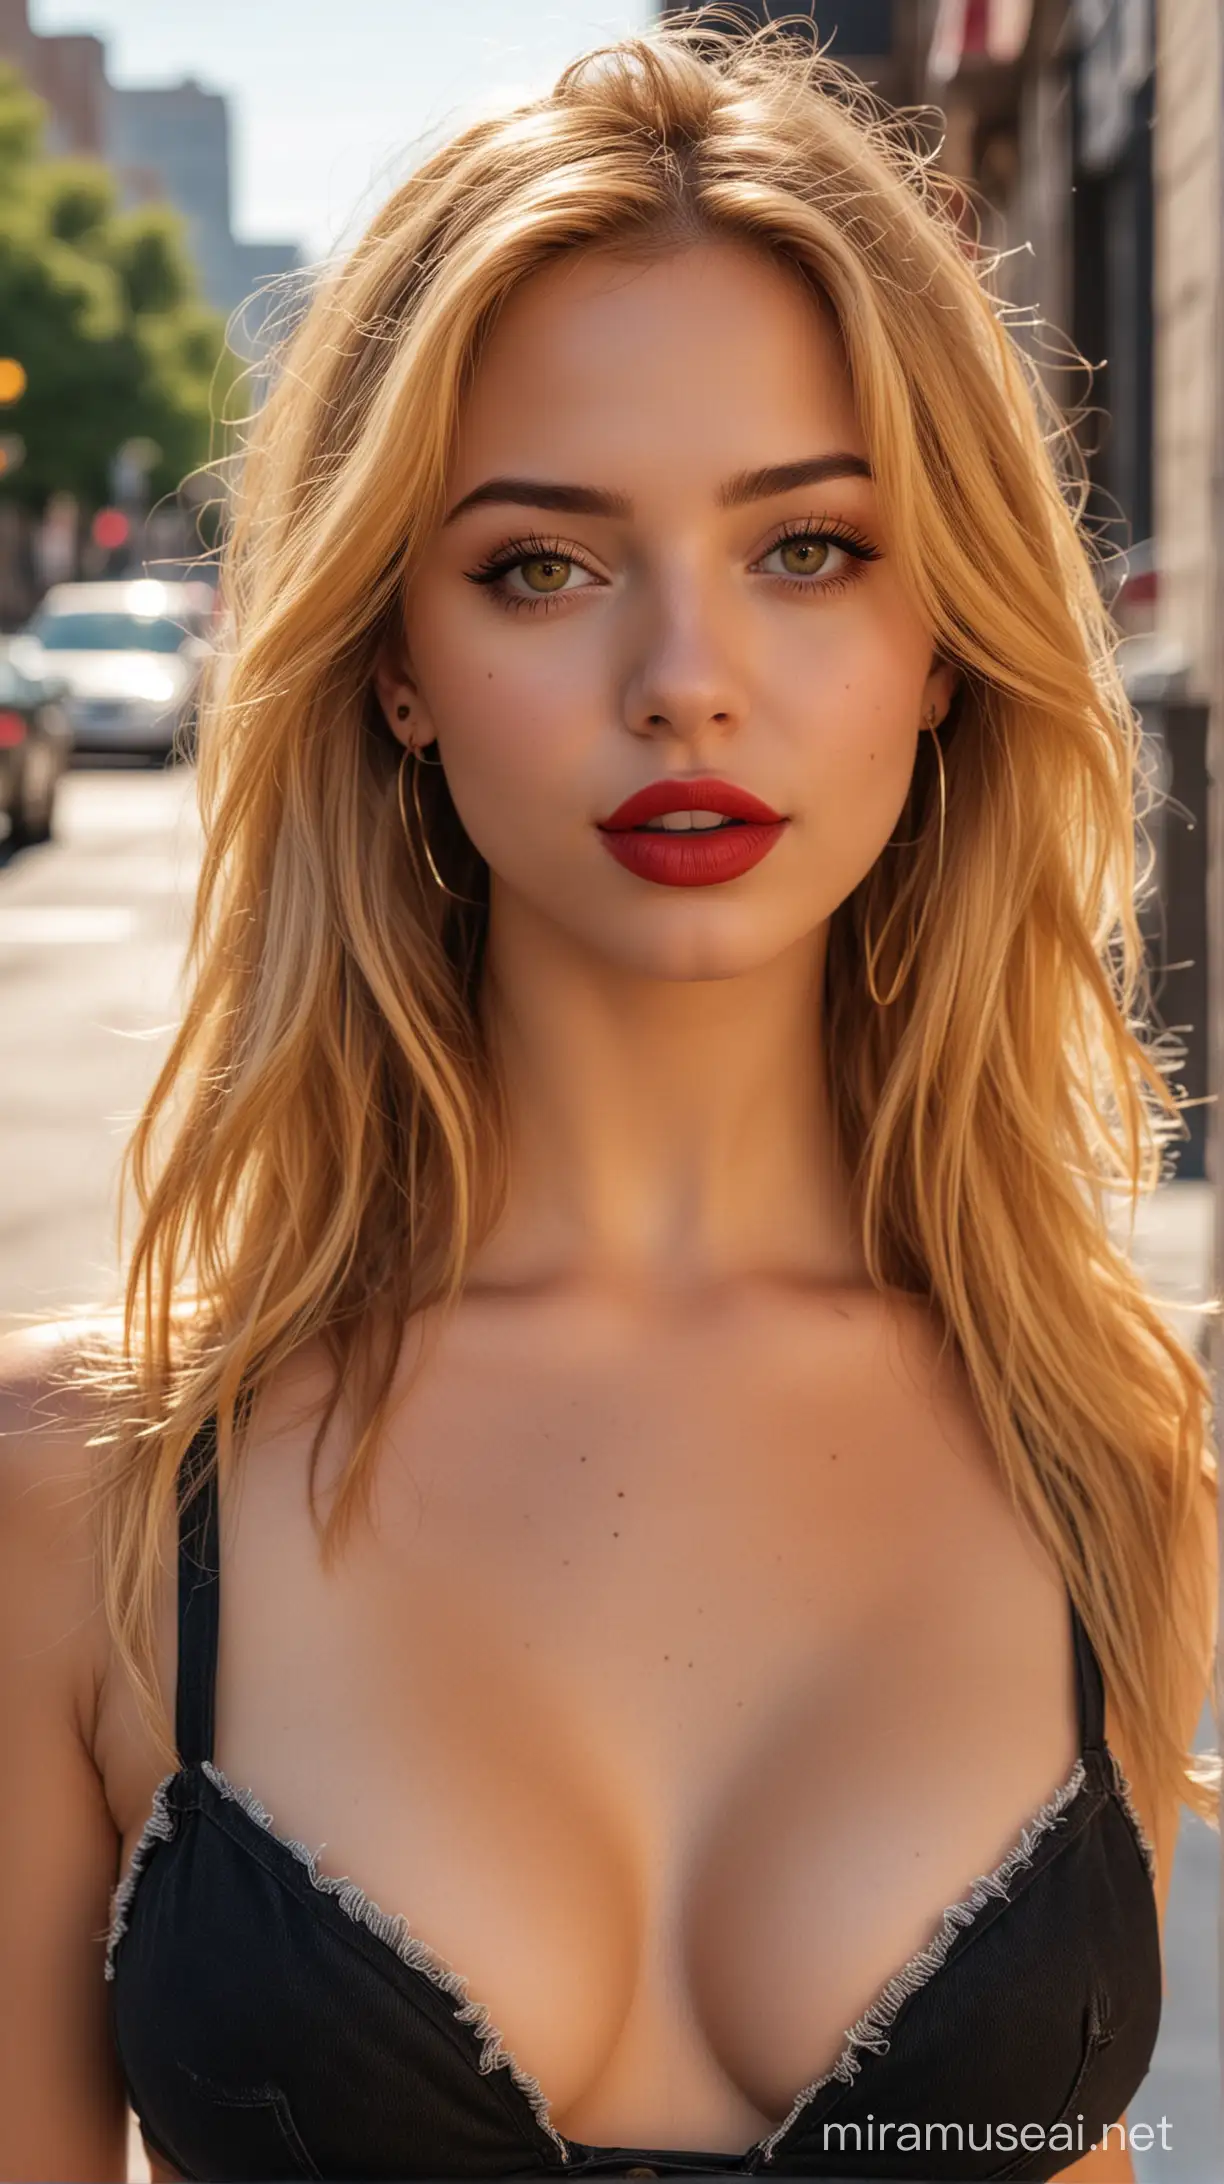 4k Ai art front view beautiful USA girl golden hair red lipstick nose ring ear tops brown jeans and black yellow and red bra in USA public street